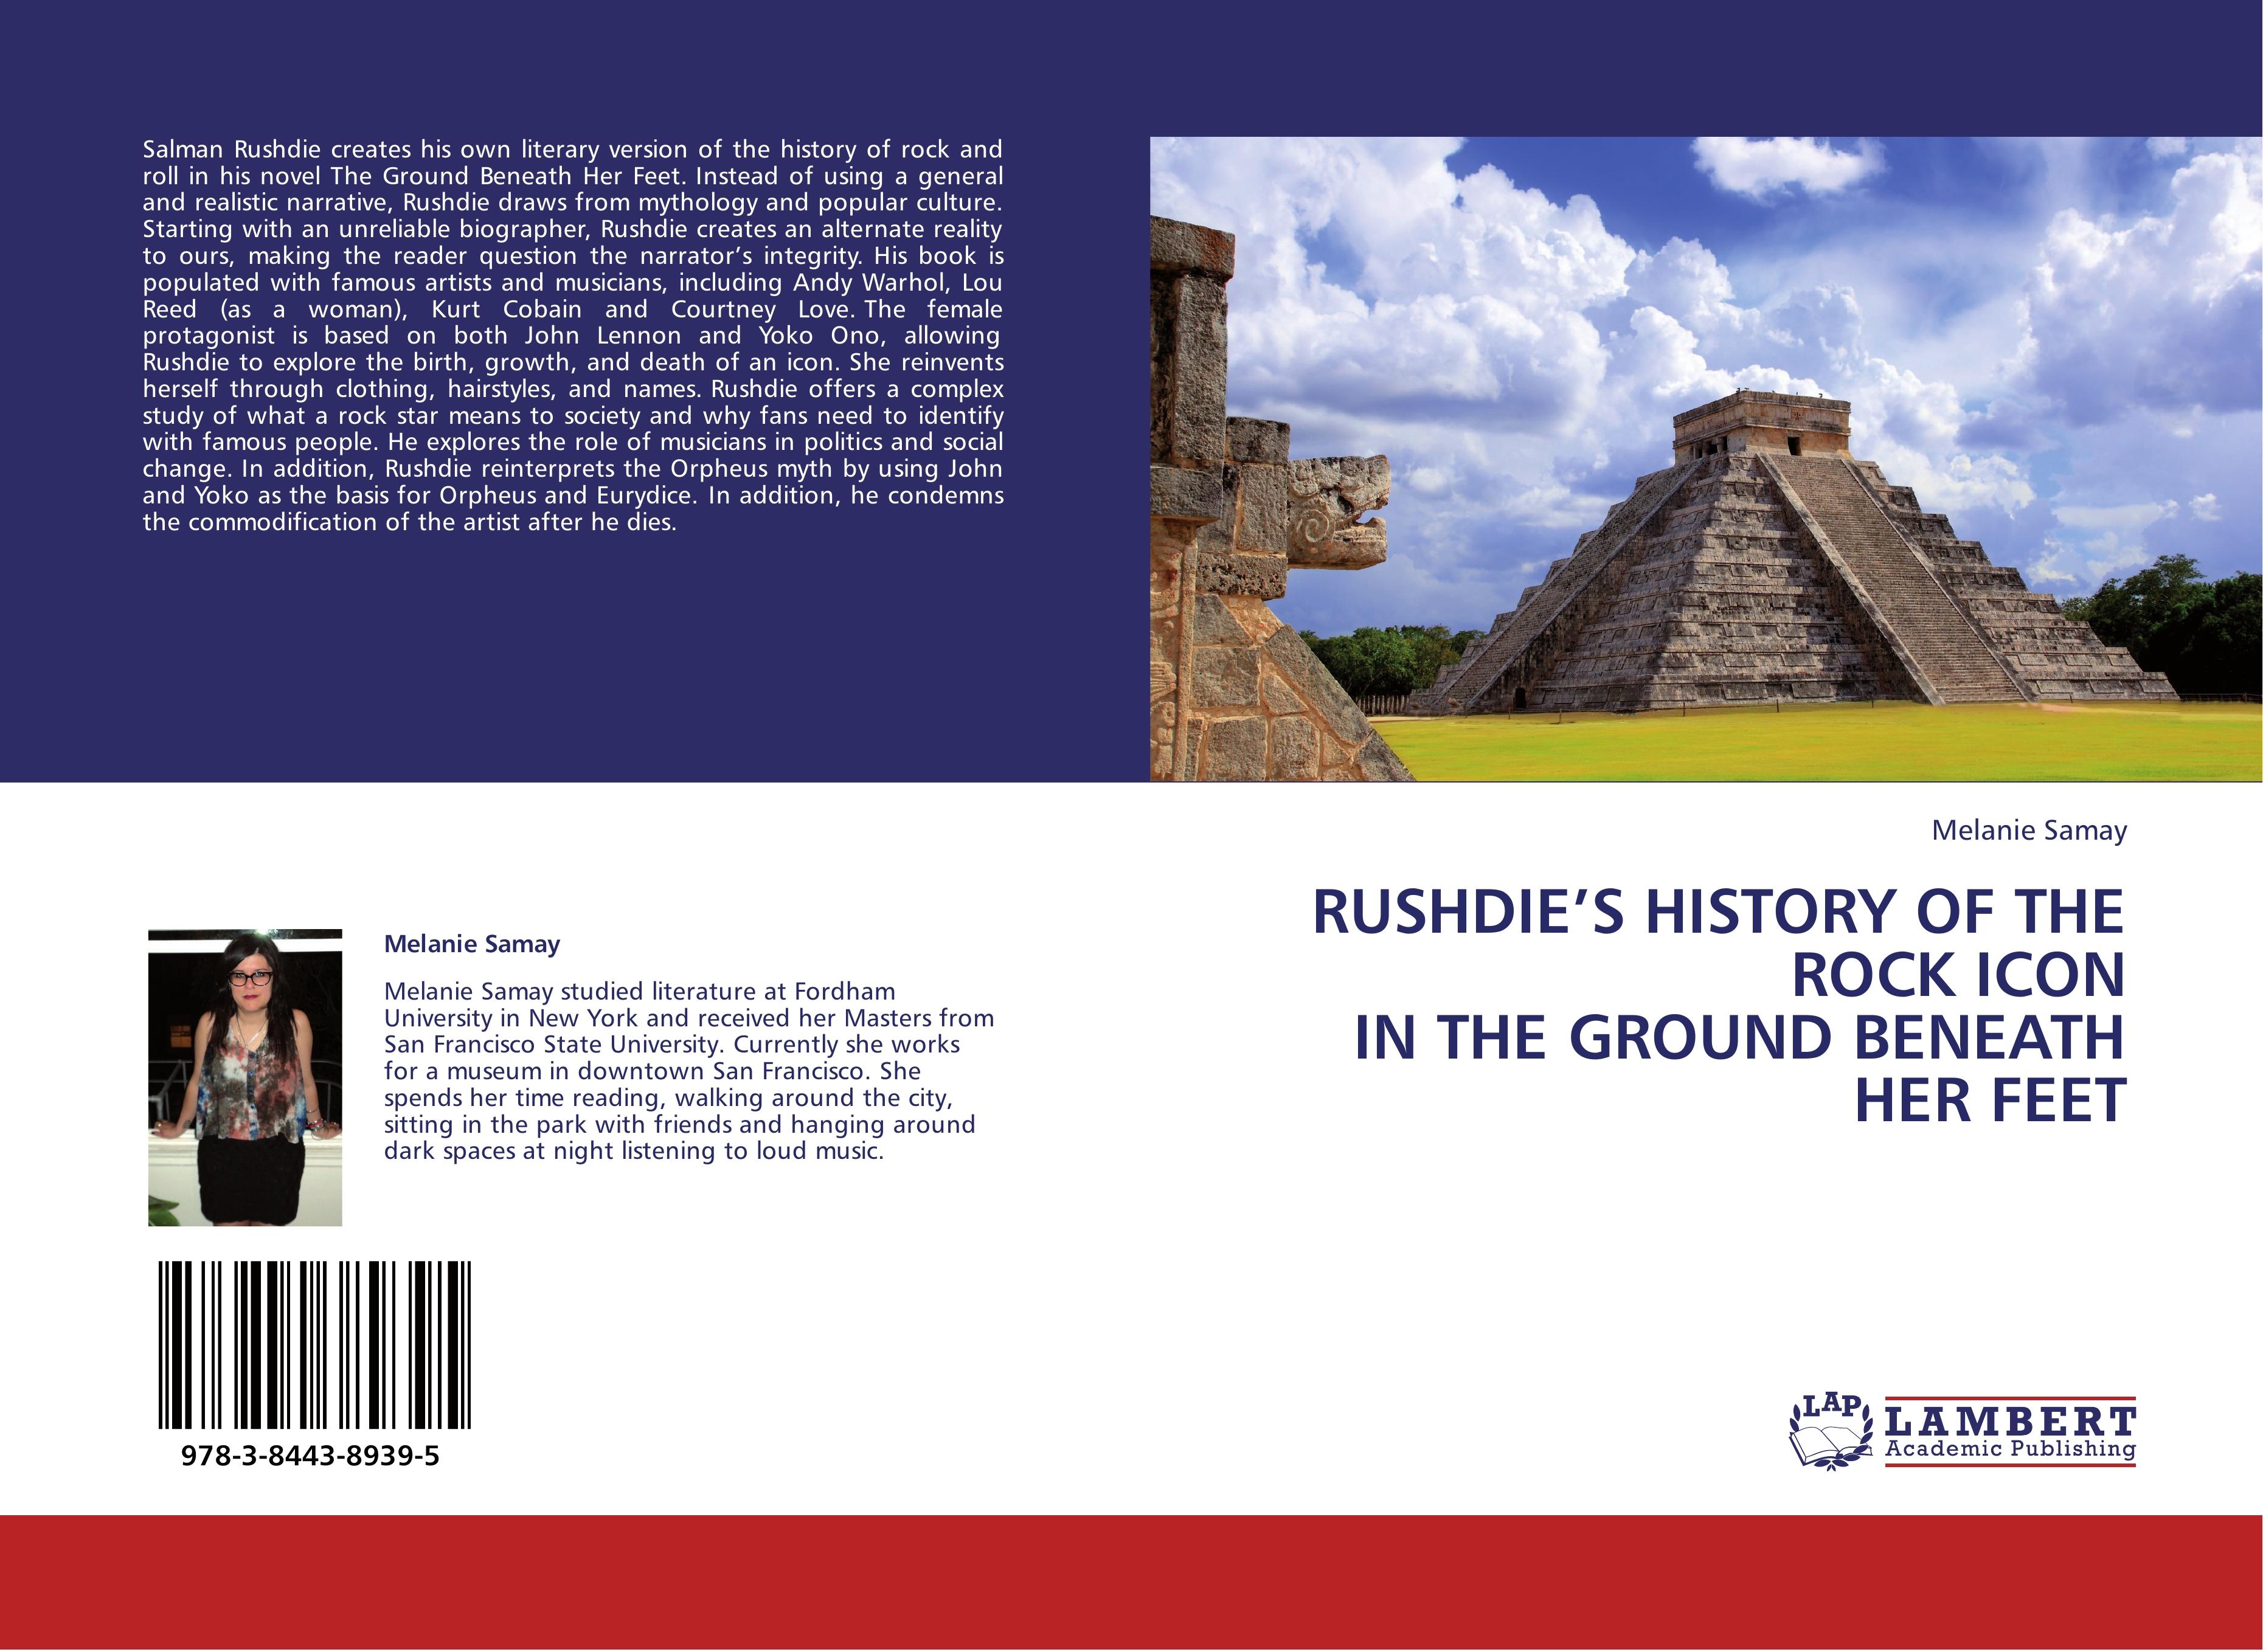 RUSHDIE S HISTORY OF THE ROCK ICON IN THE GROUND BENEATH HER FEET - Melanie Samay